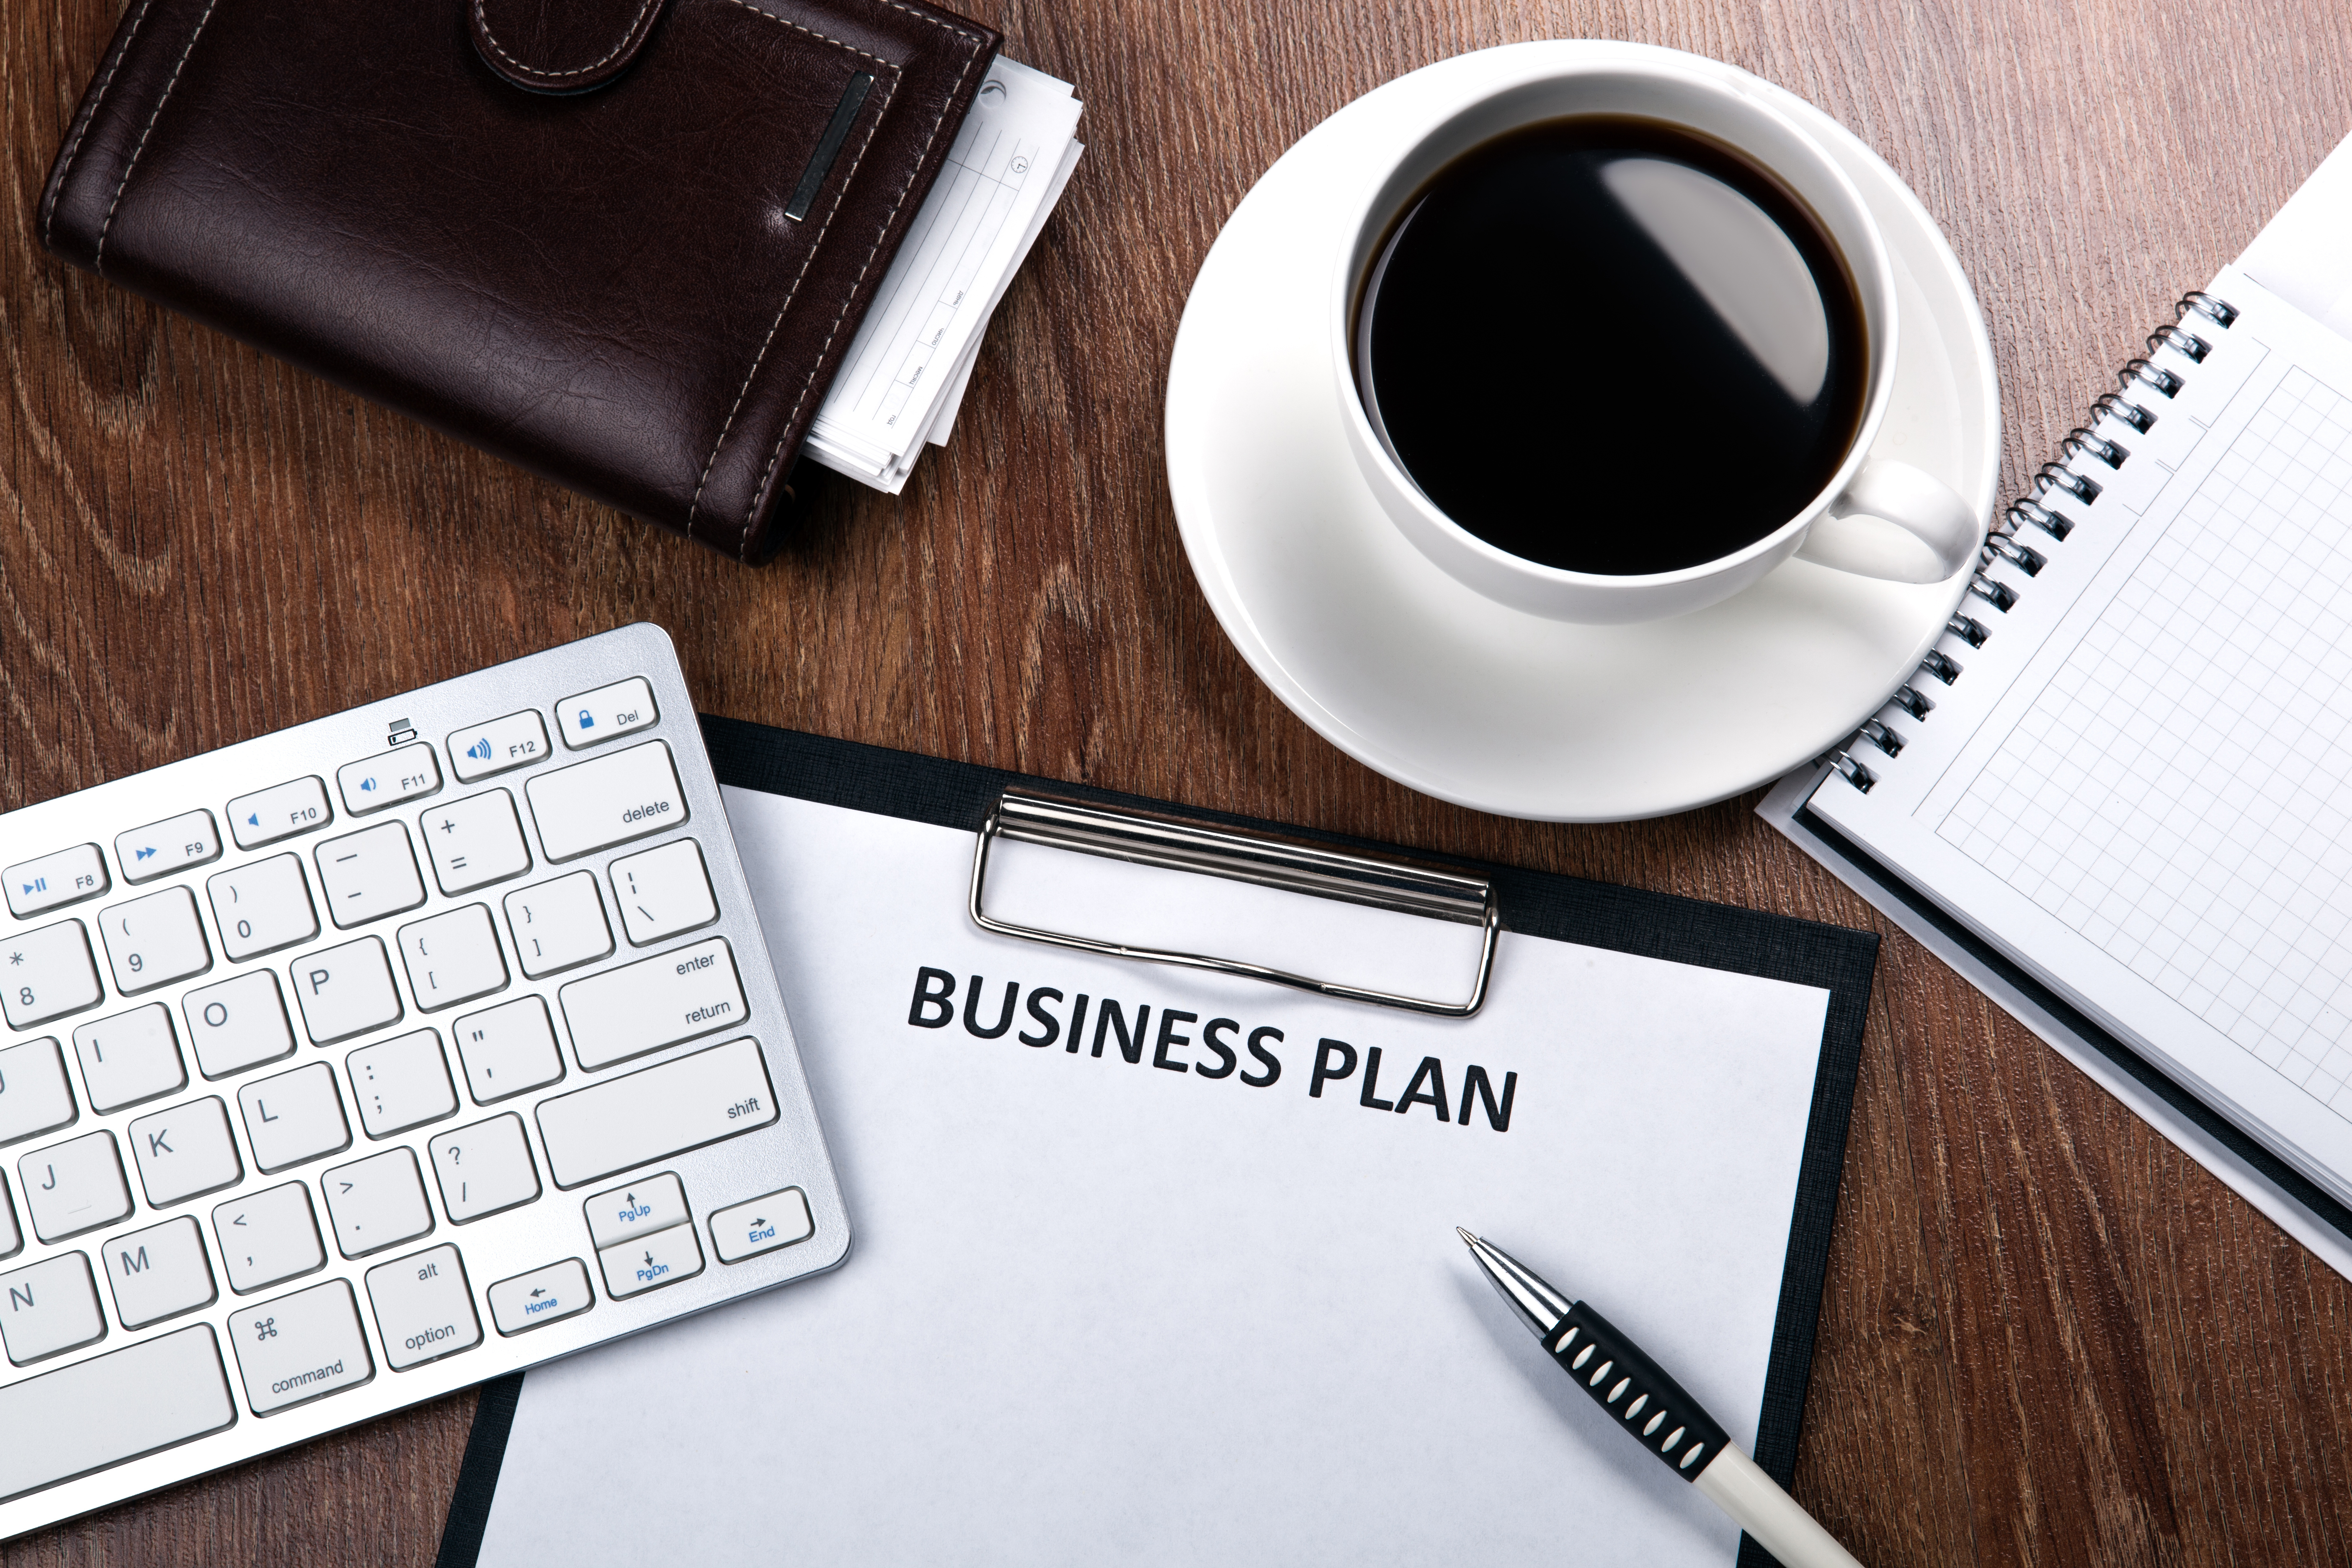 Business plan image flat lay with notebook and pen, coffee and keyboard